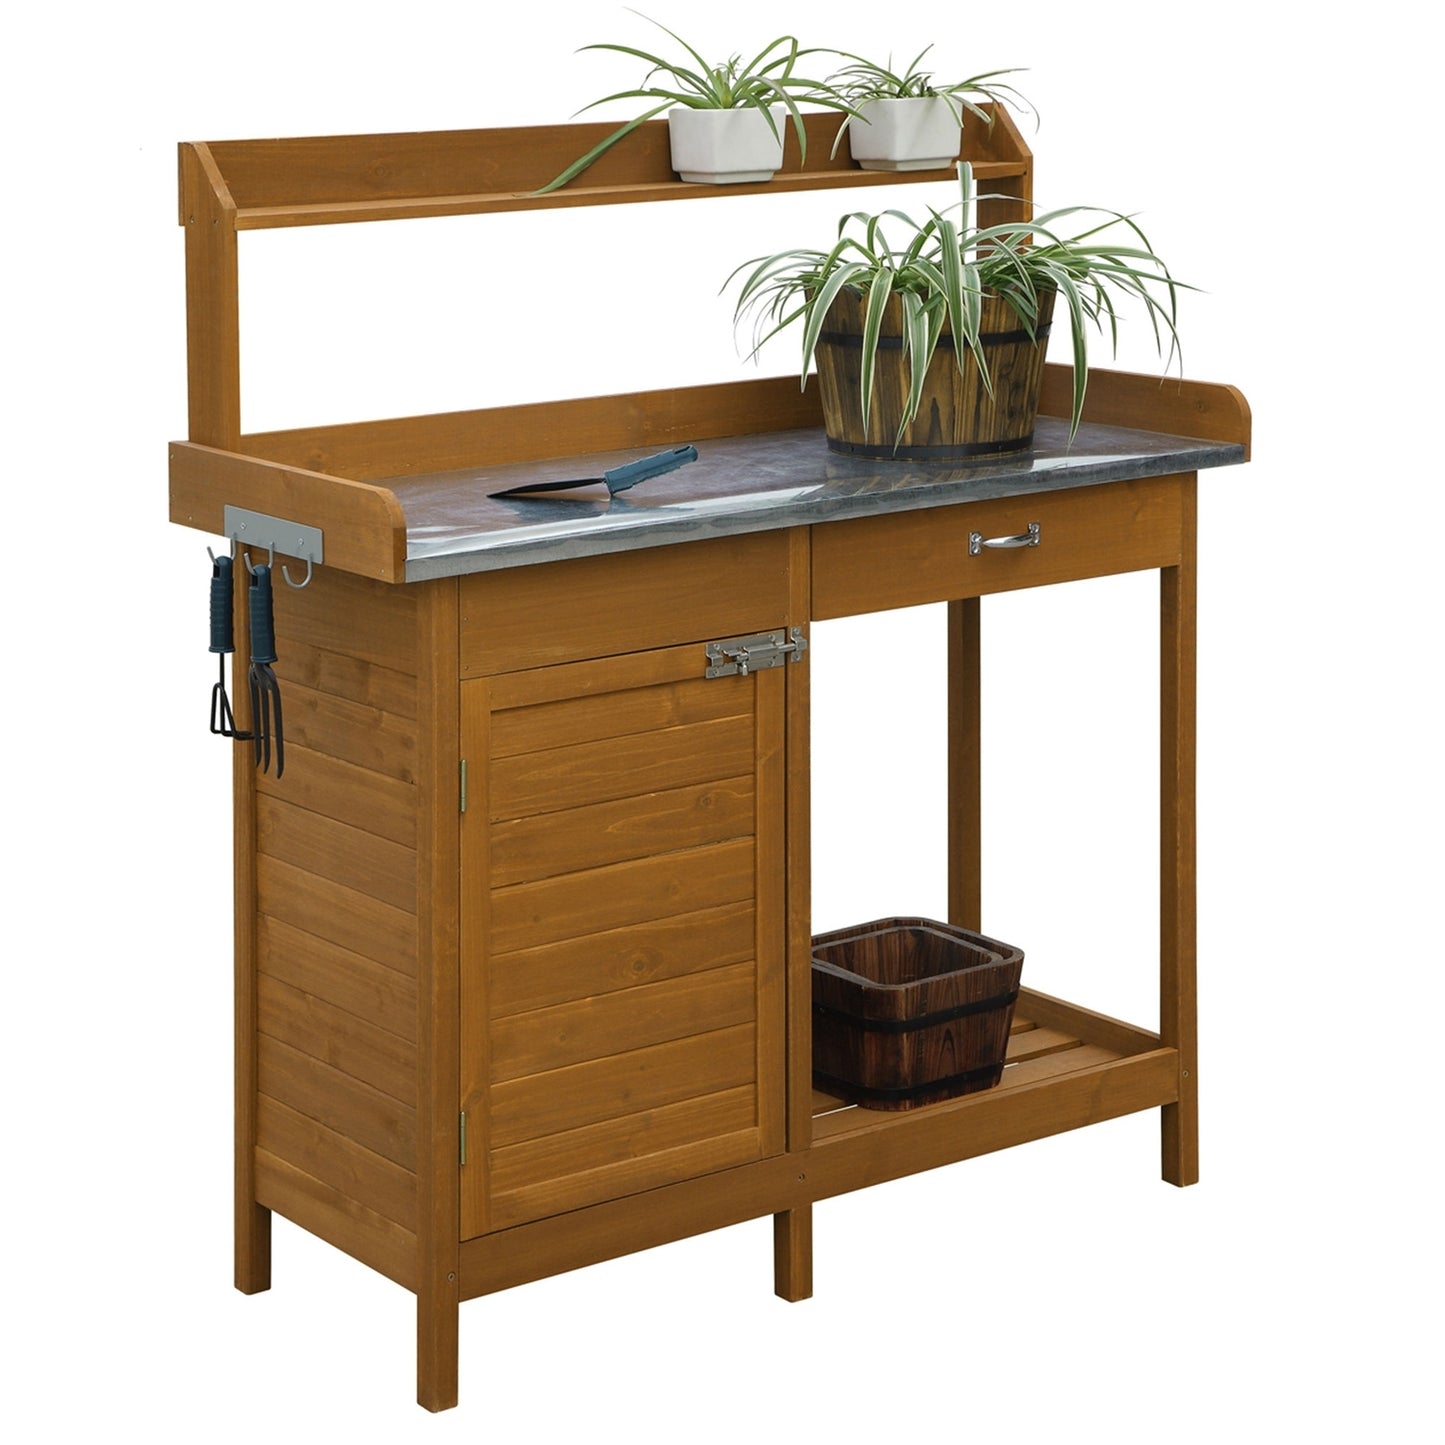 Outdoor Home Garden Potting Bench with Metal Table Top and Storage Cabinet